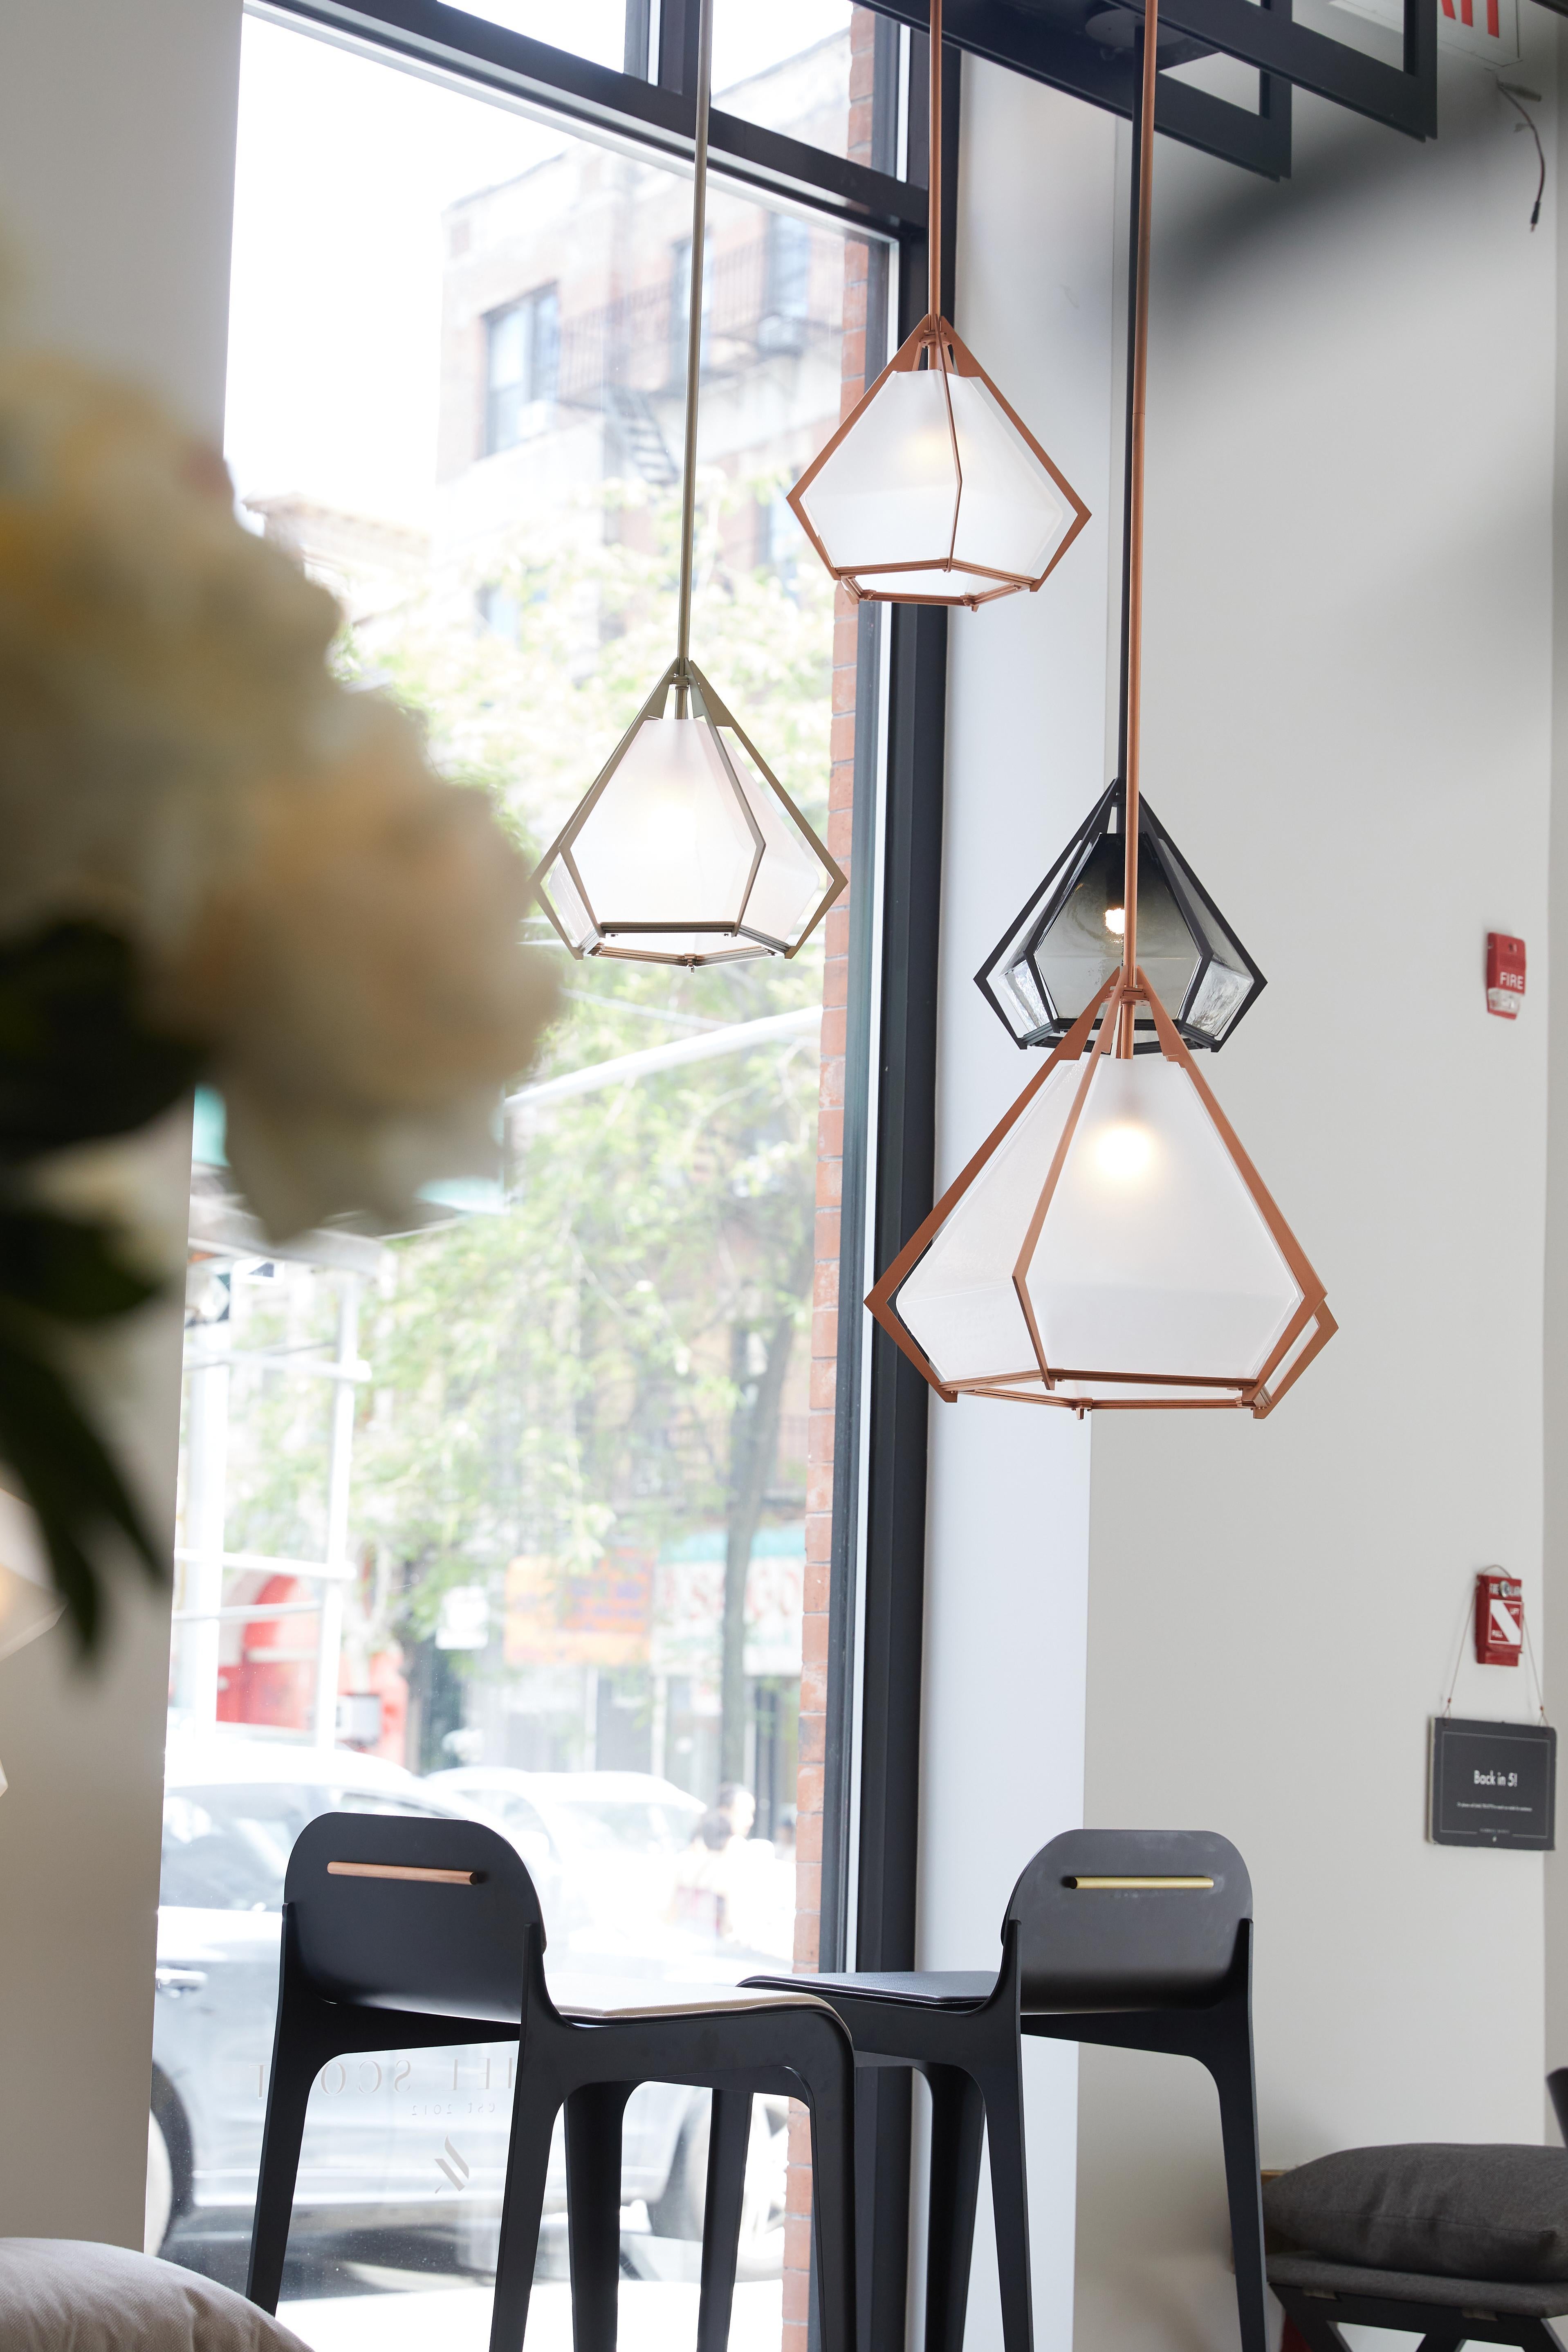 The Harlow Small Pendant offers an elegant starburst of light that reflects and refracts through its mold-blown glass shade. A sparkling prism, the Harlow Small Pendant is directly inspired by the world of jewelry with its metallic frame encasing a